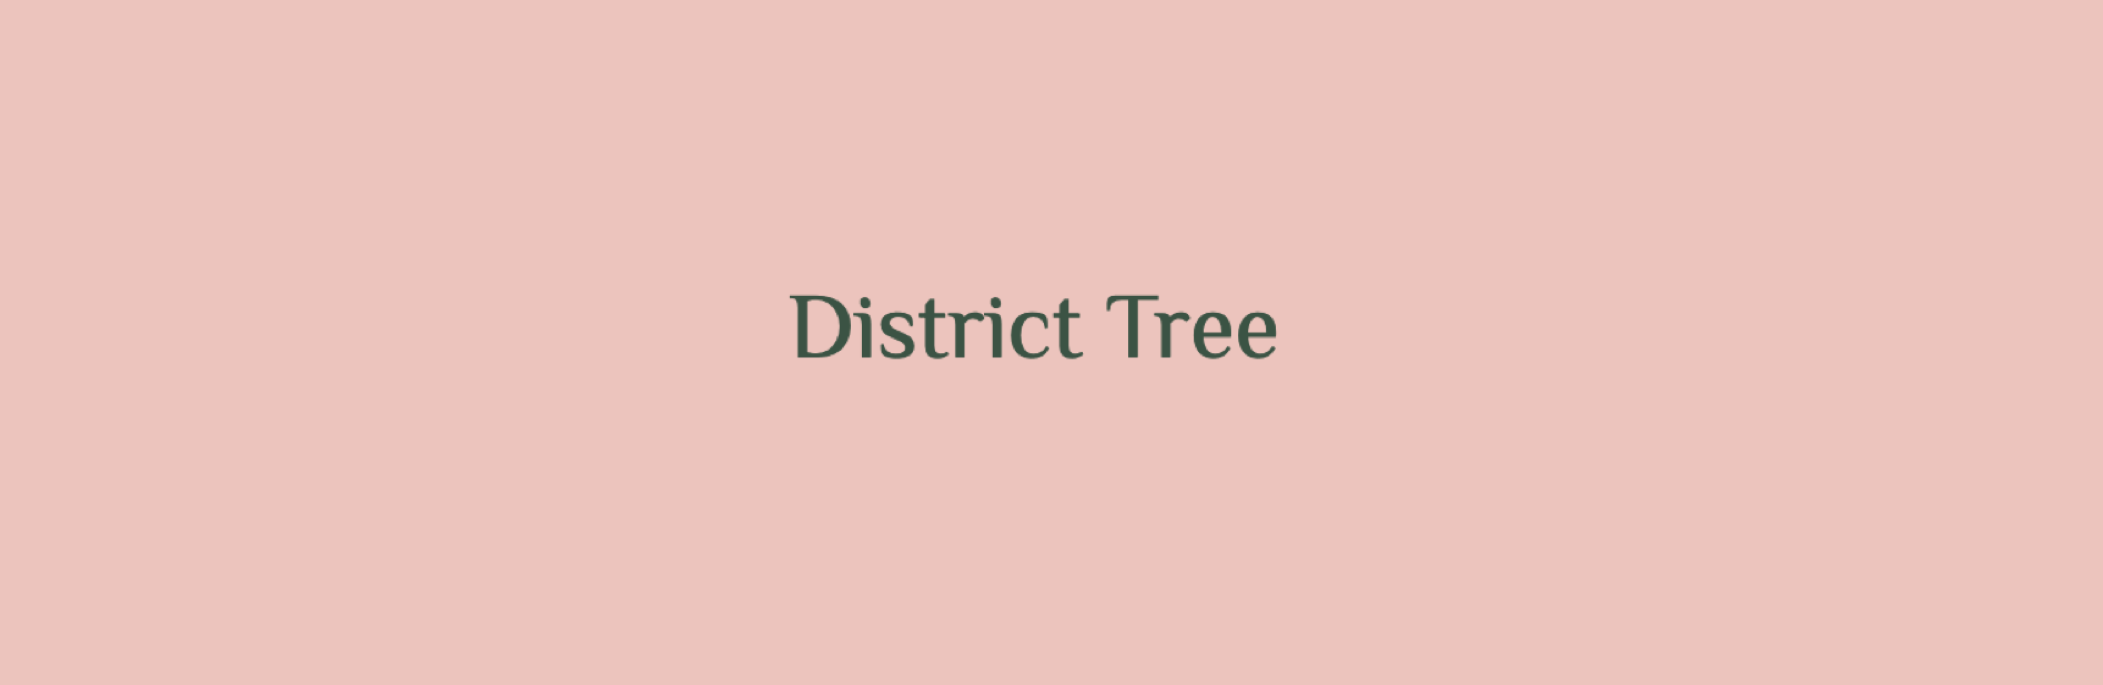 district tree title